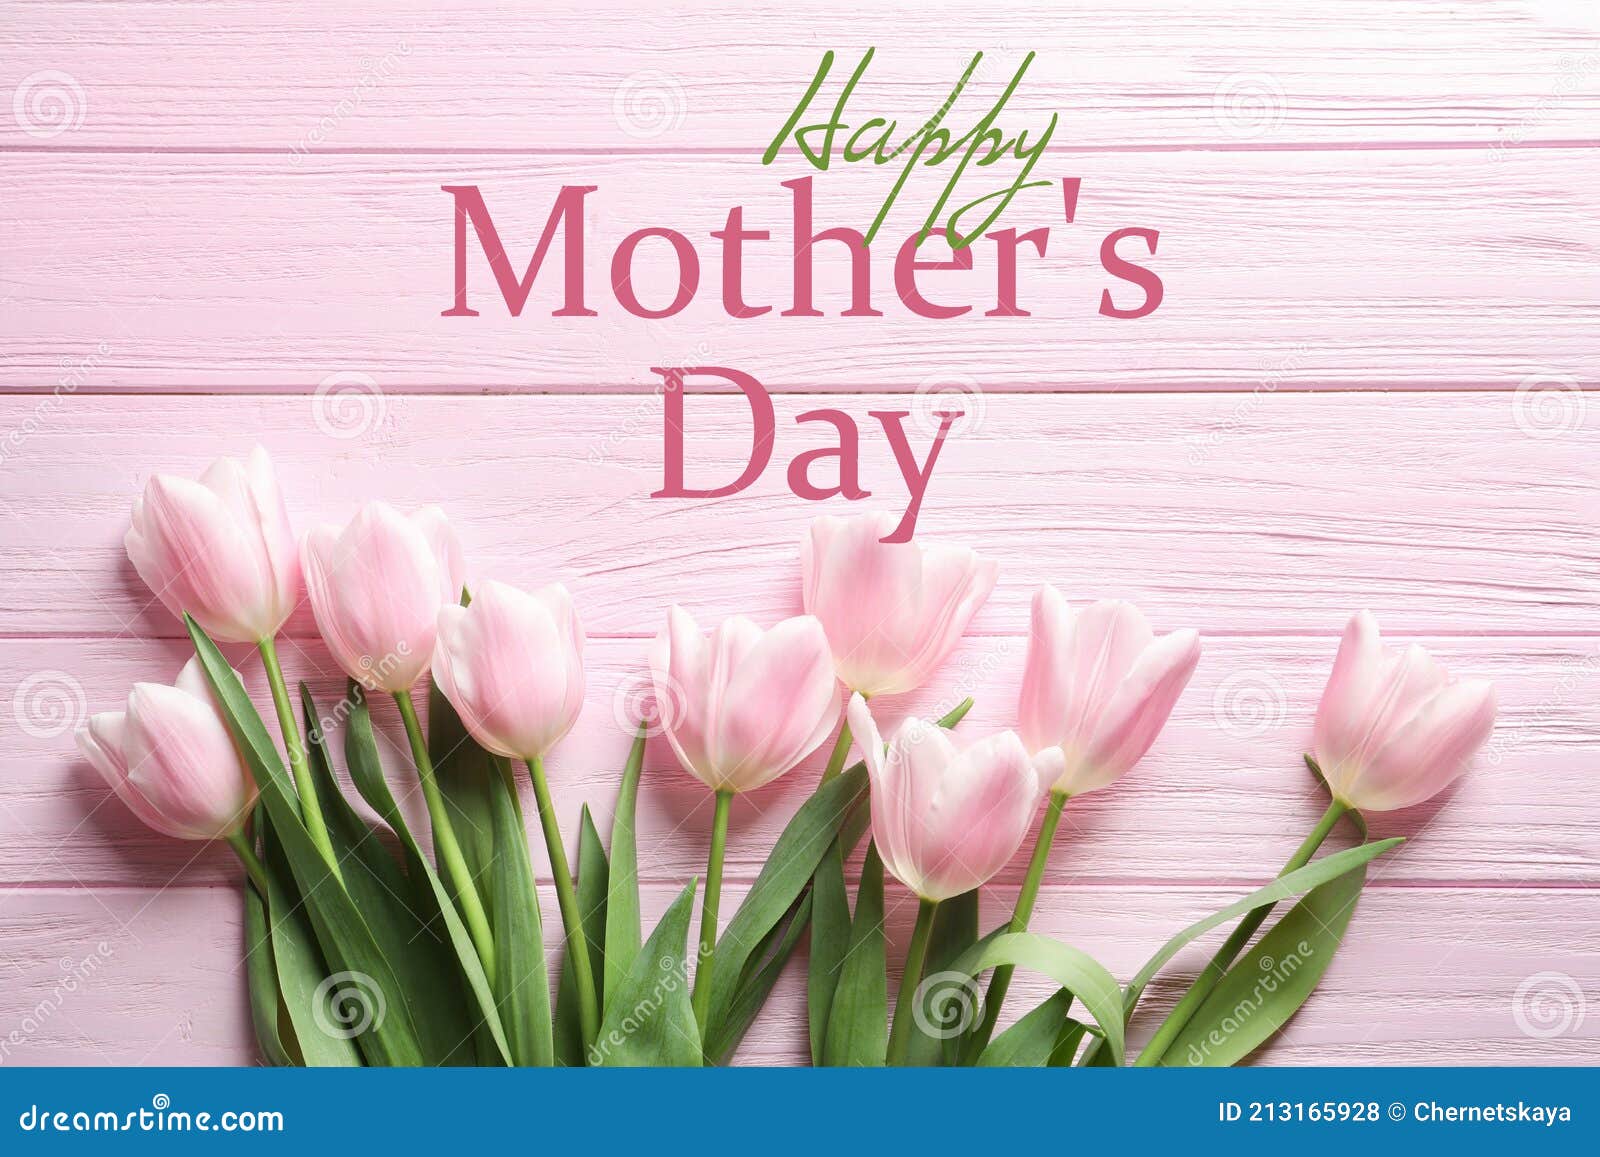 17,957 Happy Mother Day Tulips Stock Photos - Free & Royalty-Free ...